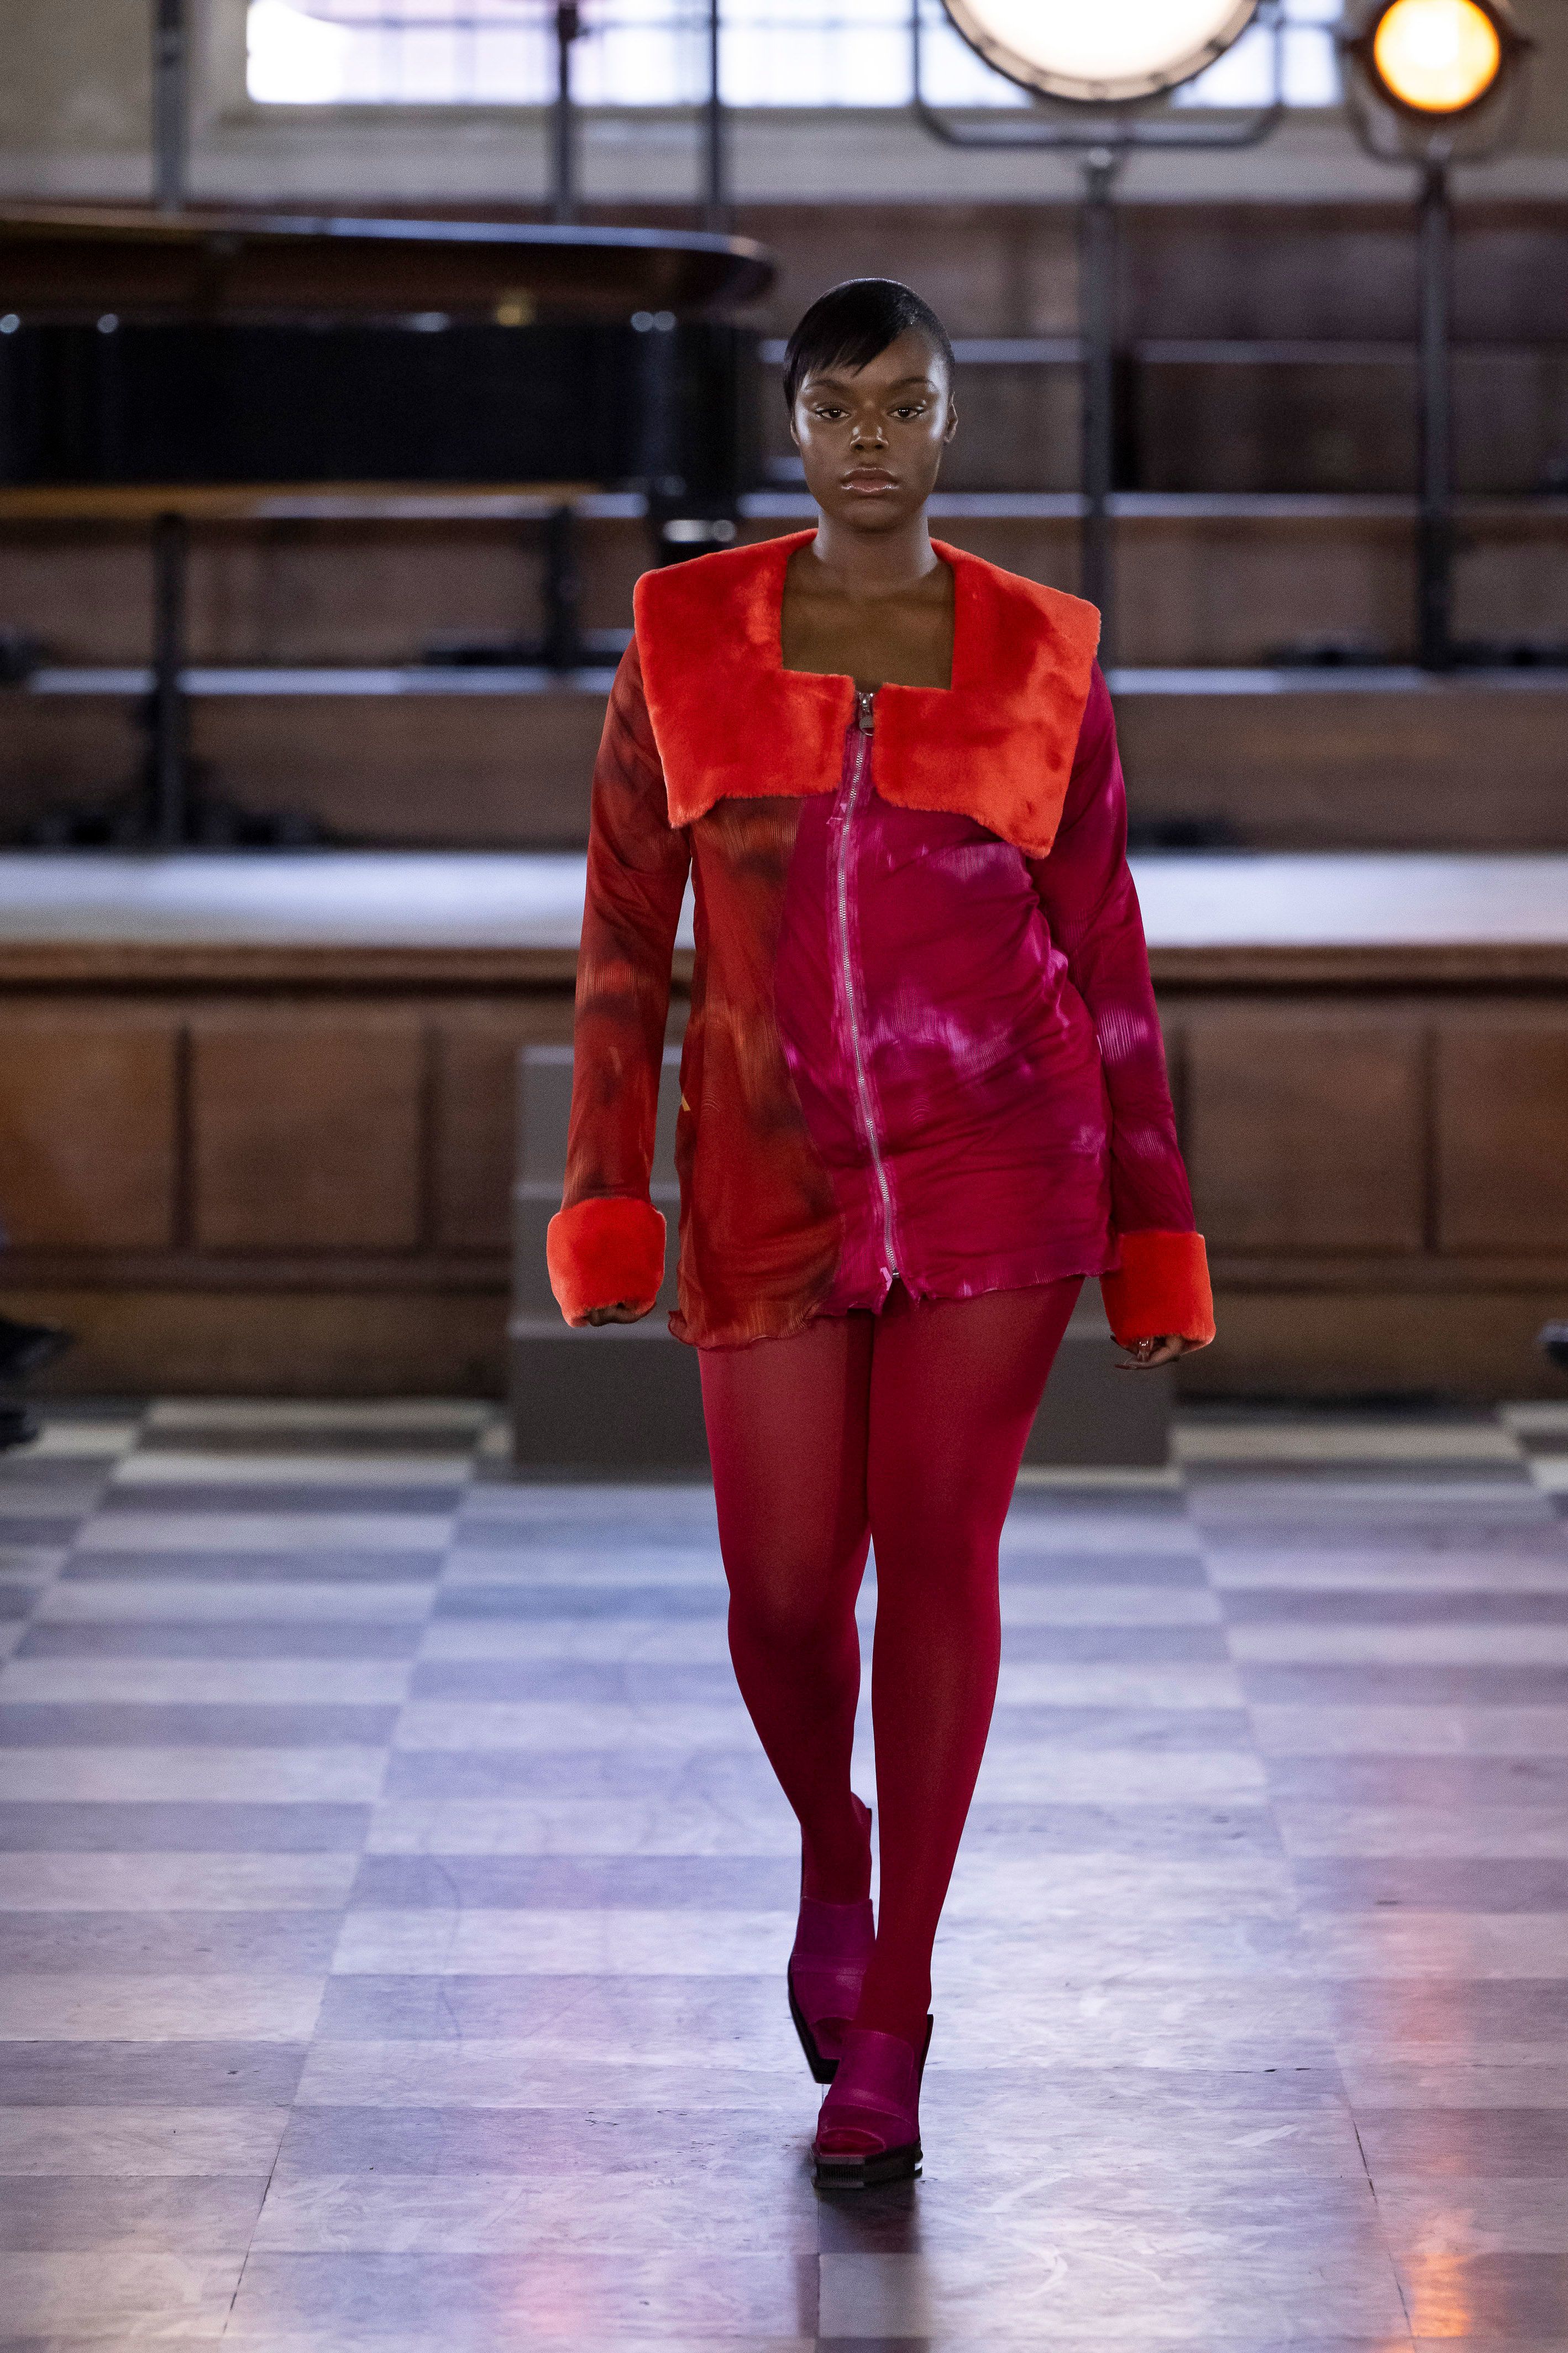 A model walks on the runway at the IA London fashion show during Fall  Winter 2022 Collections Fashion Show at London Fashion Week in London, UK  on February 20, 2022. (Photo by